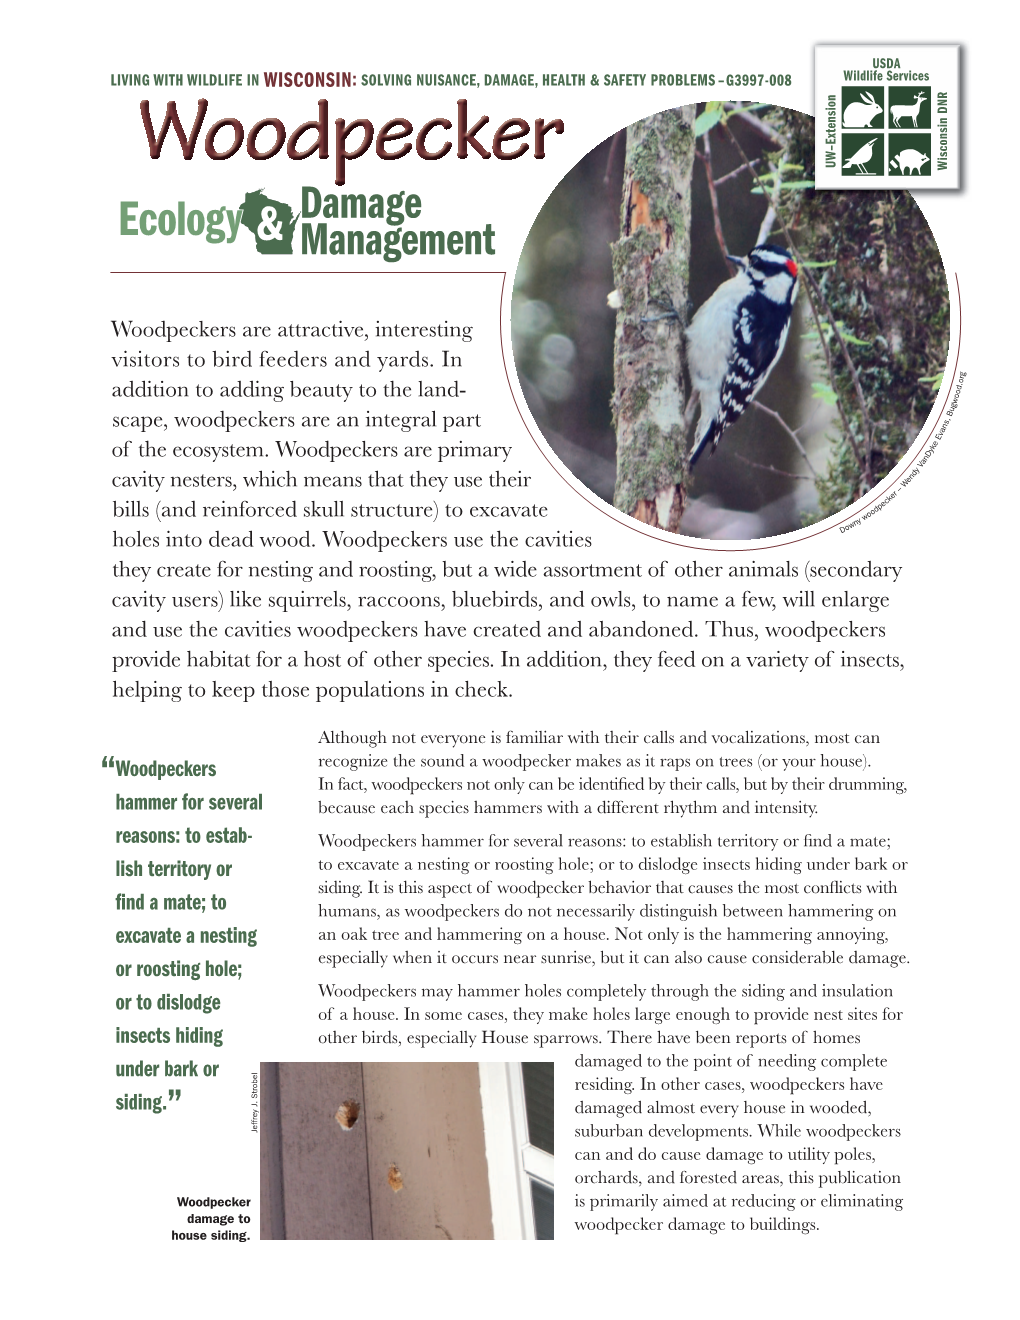 Woodpecker Ecology and Damage Management (G3997-008)